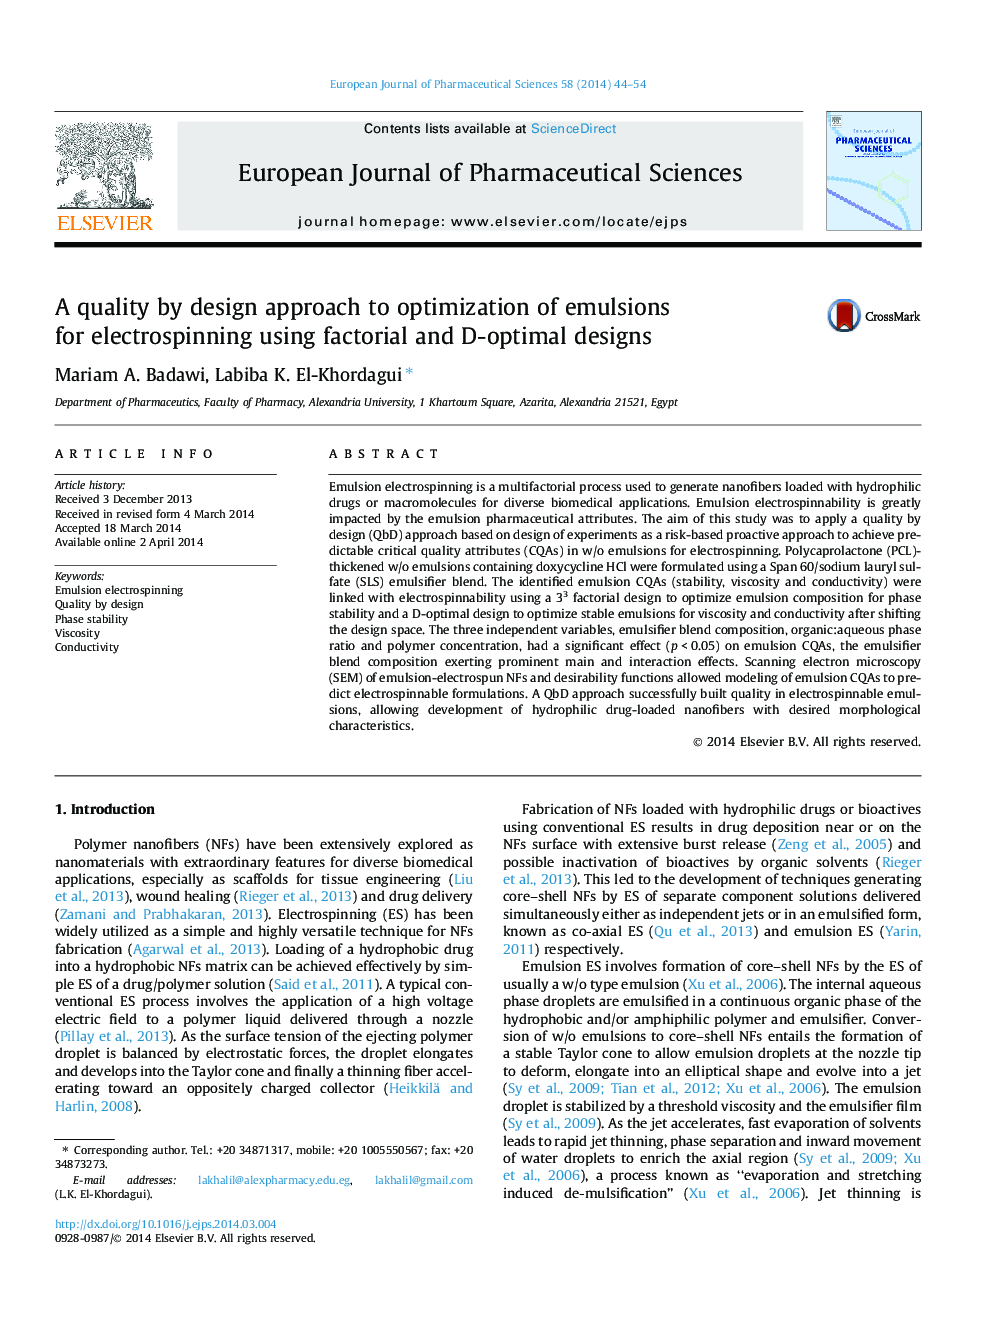 A quality by design approach to optimization of emulsions for electrospinning using factorial and D-optimal designs